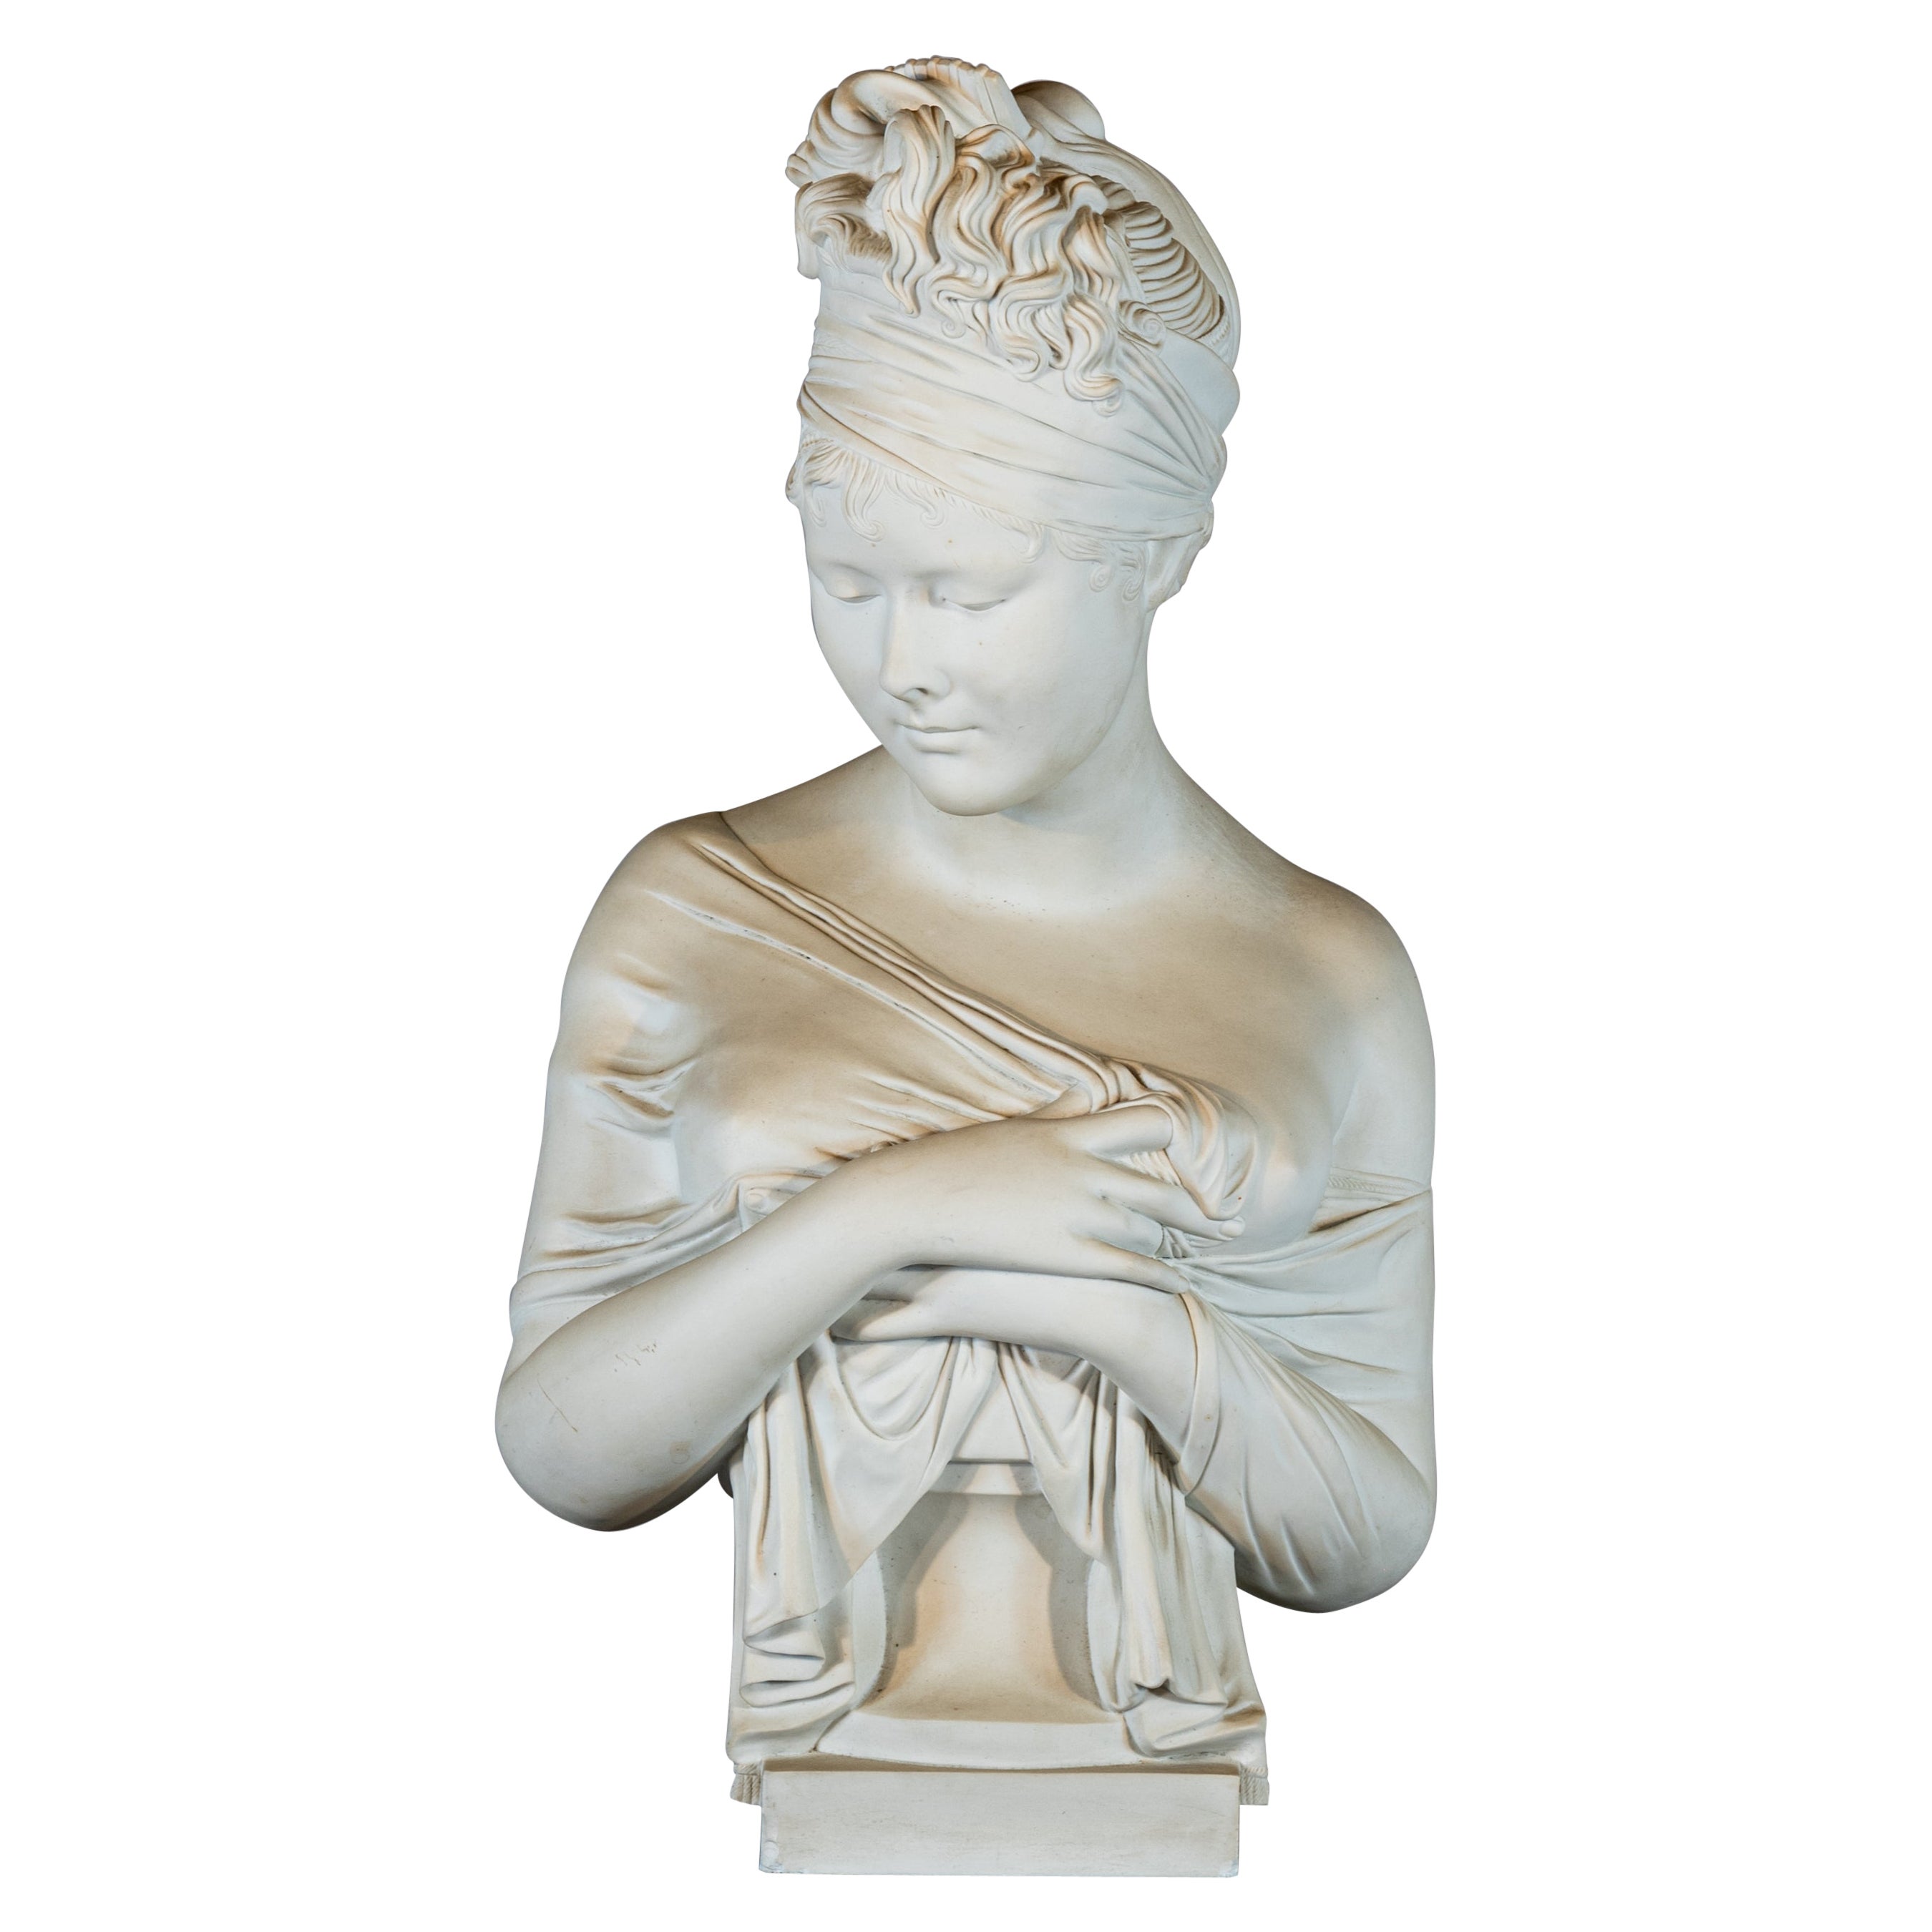 French Faience Bust of Madame Recamier, After Houdon